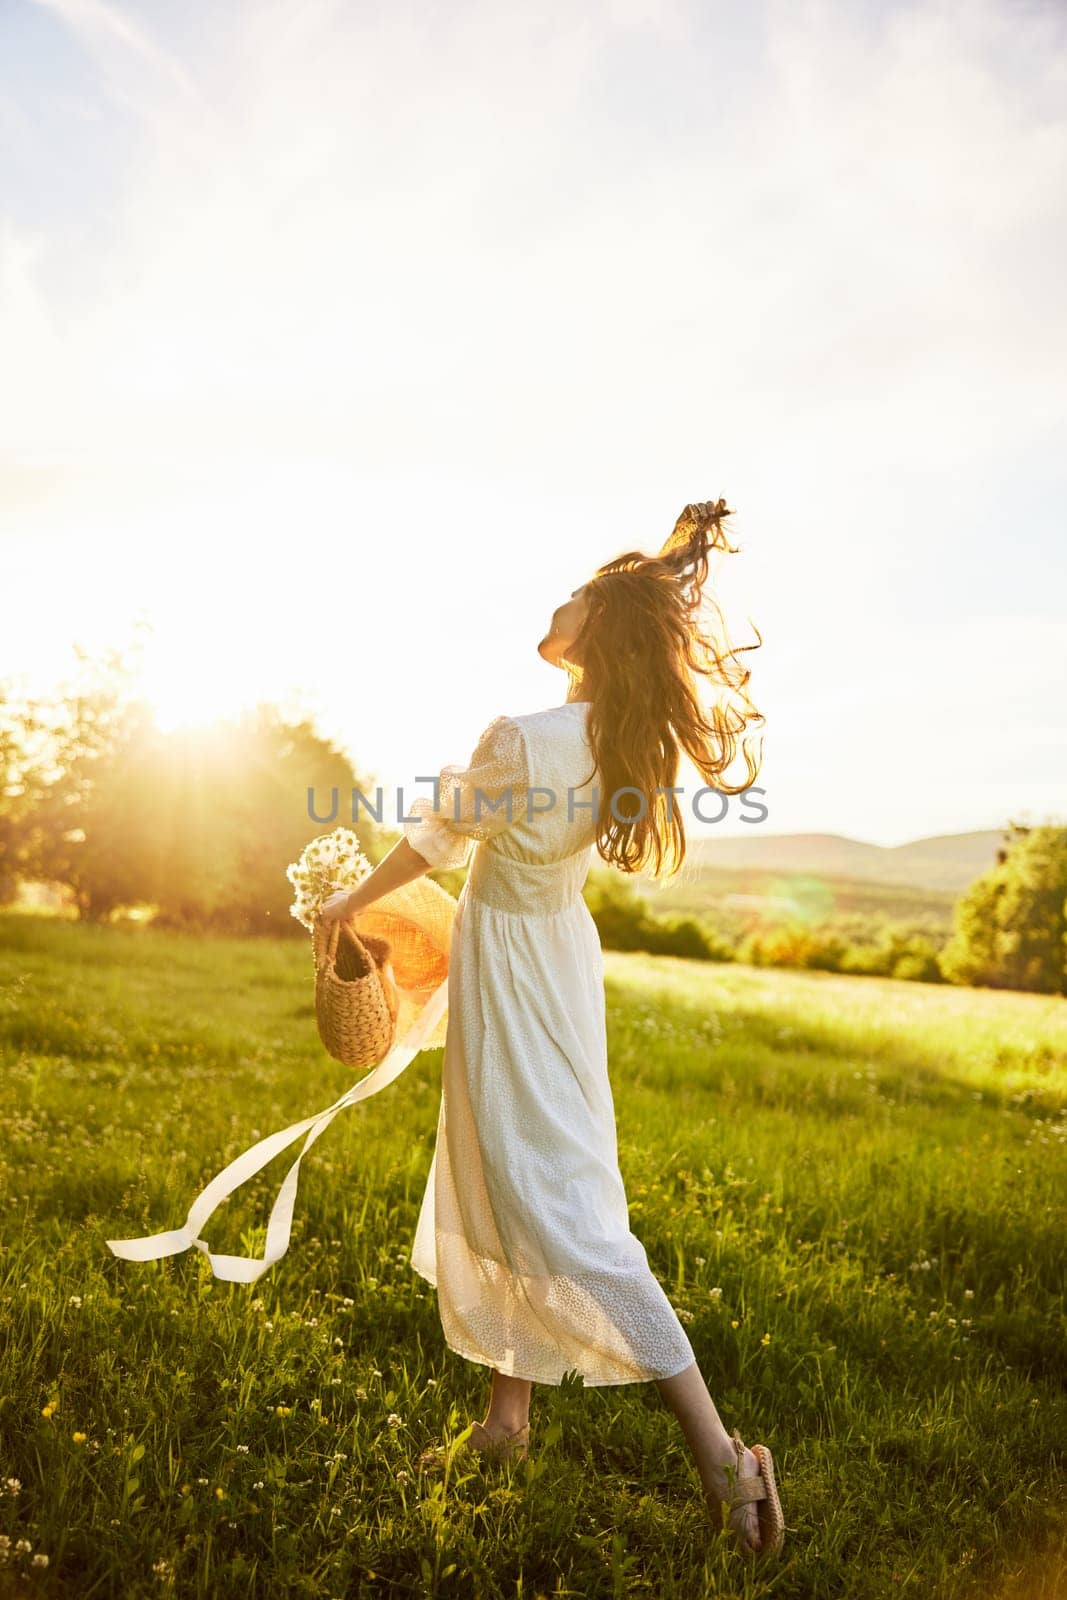 a woman in a light dress in a chamomile field against the background of a sunset stands with her back to the camera with a basket of flowers in her hands. High quality photo